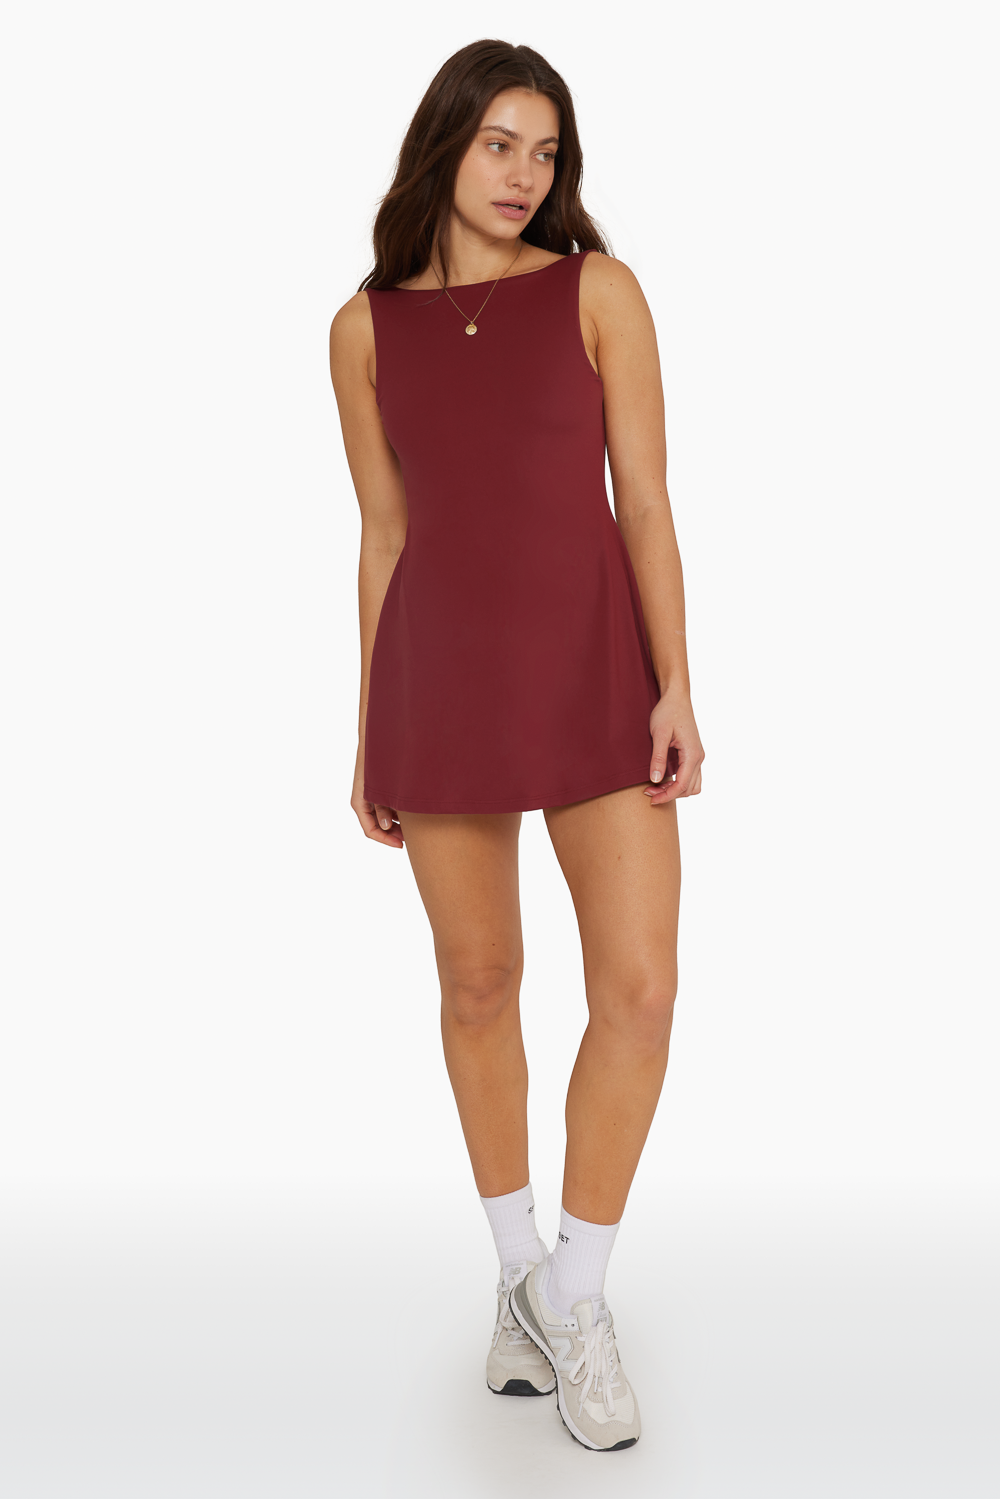 SPORTBODY® LOW BACK DRESS - SCARLET Featured Image